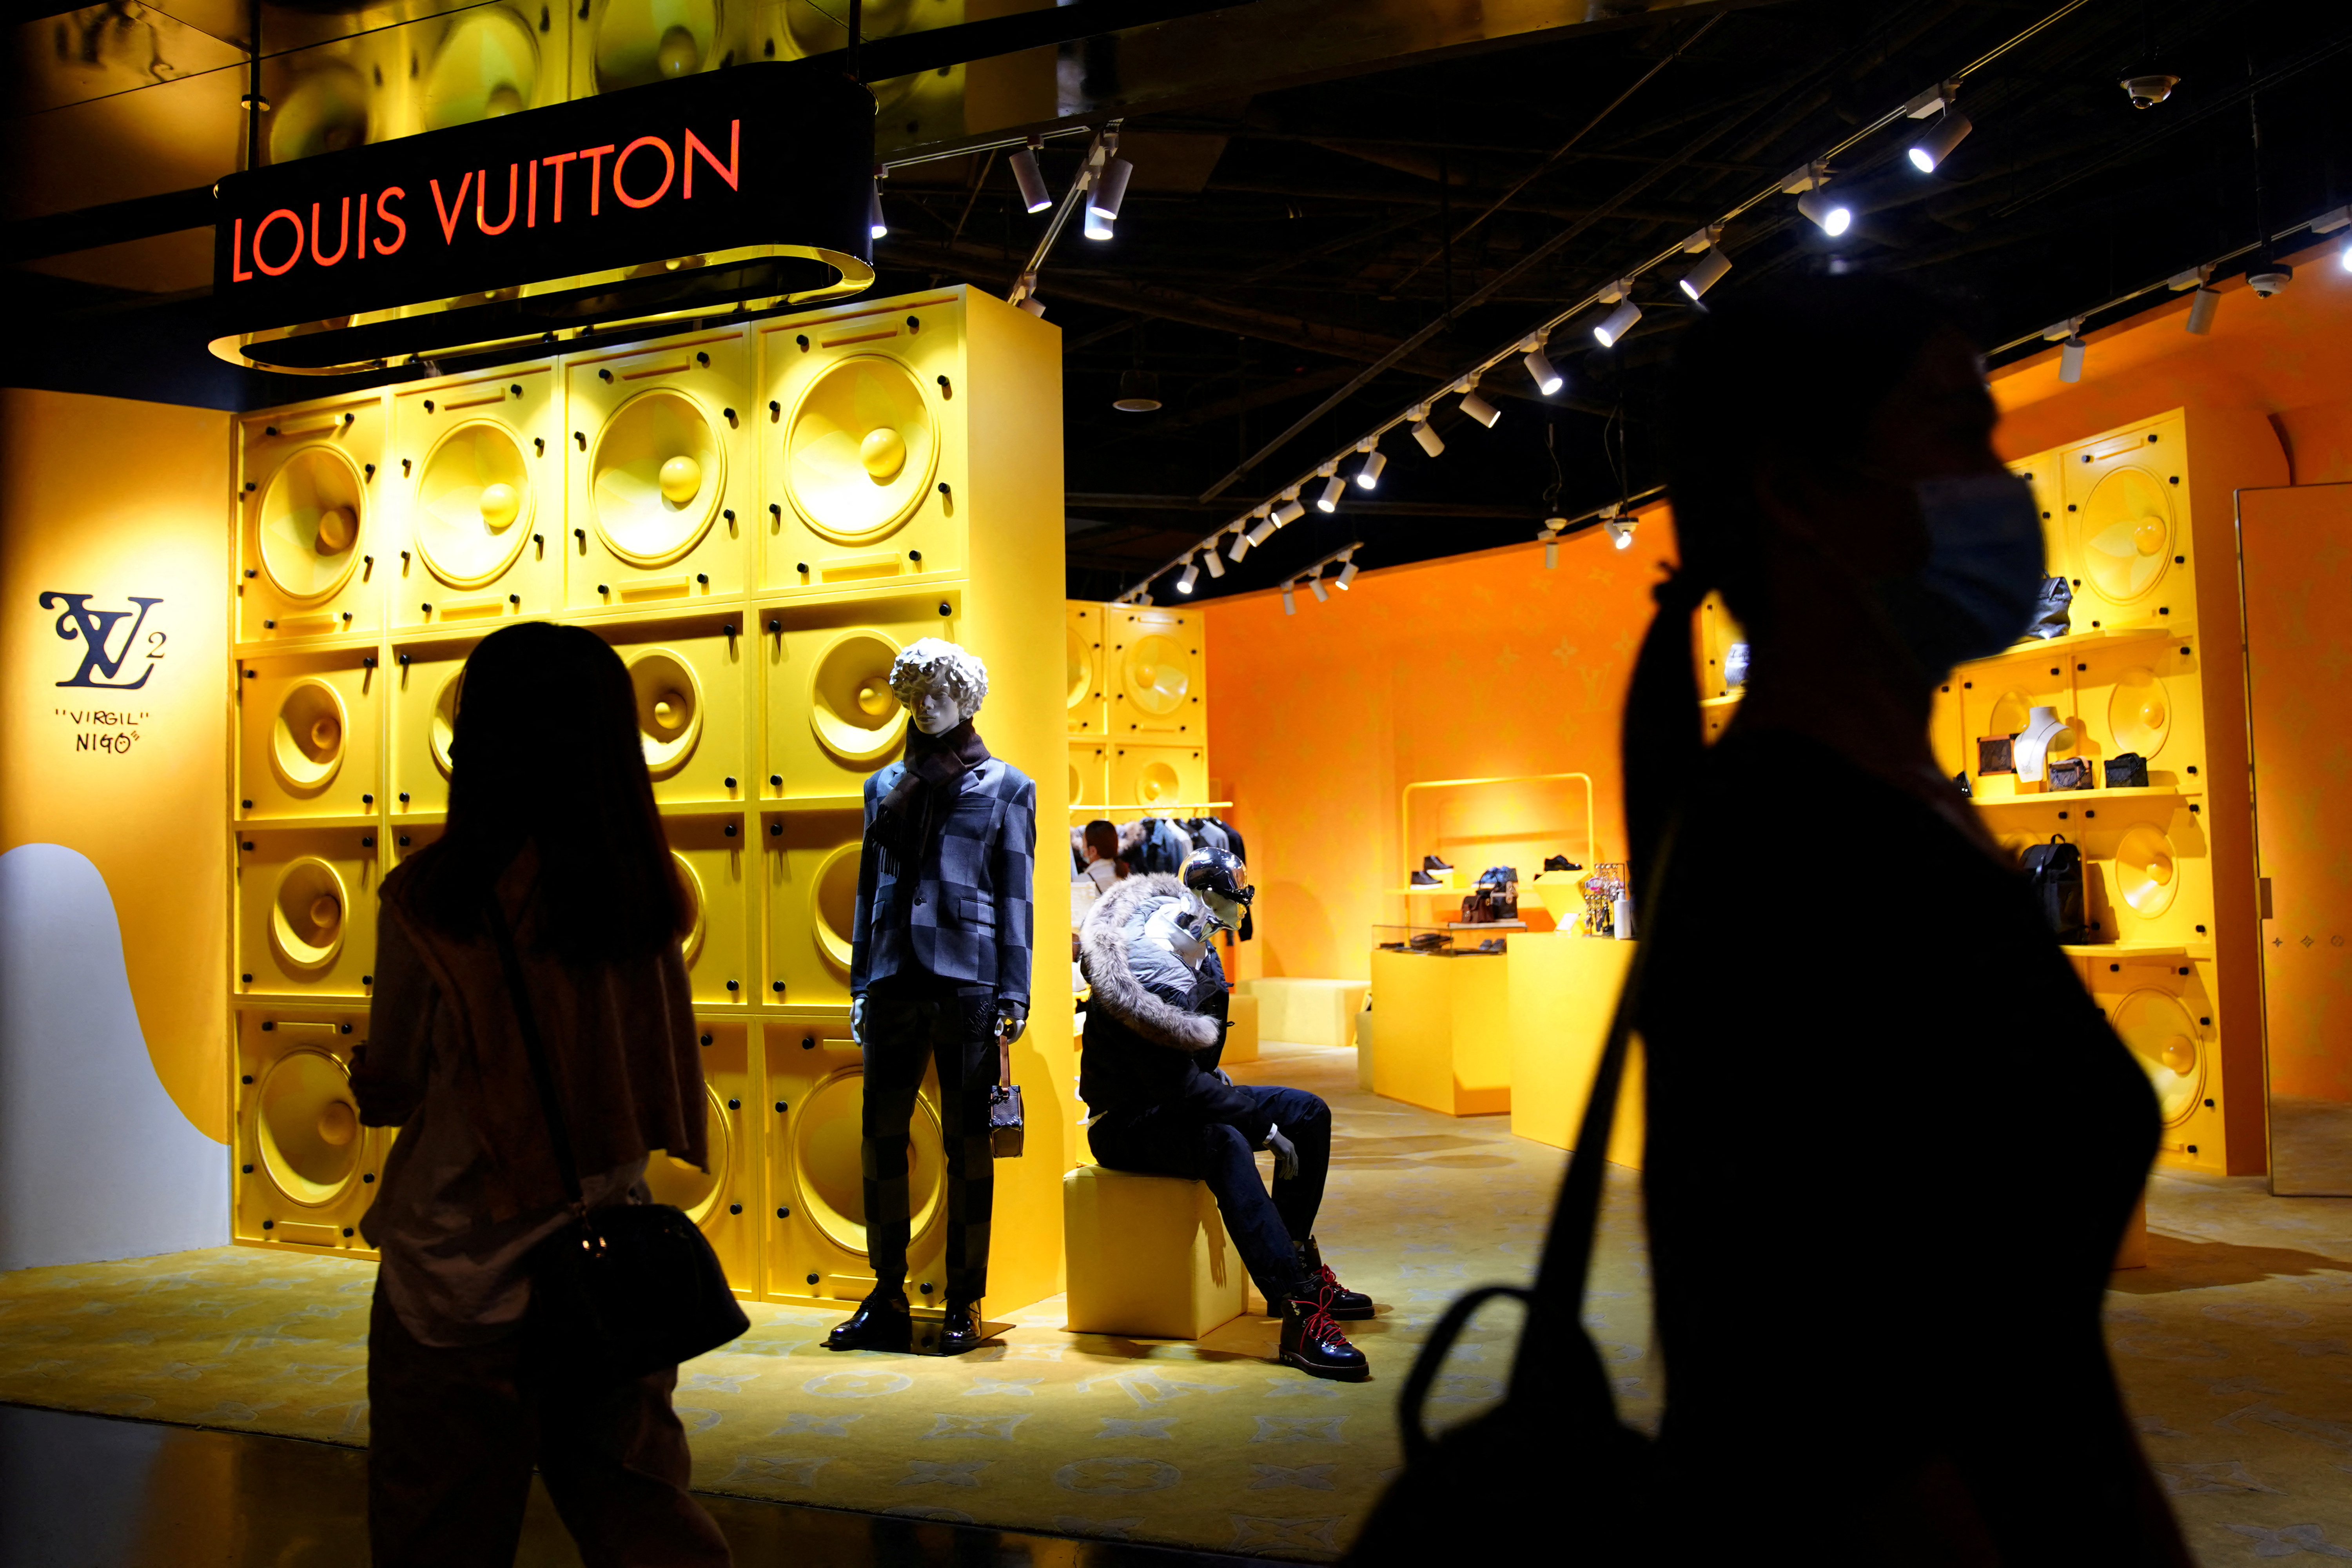 COVID-19 Impact on LVMH Moet Hennessy Vuitton